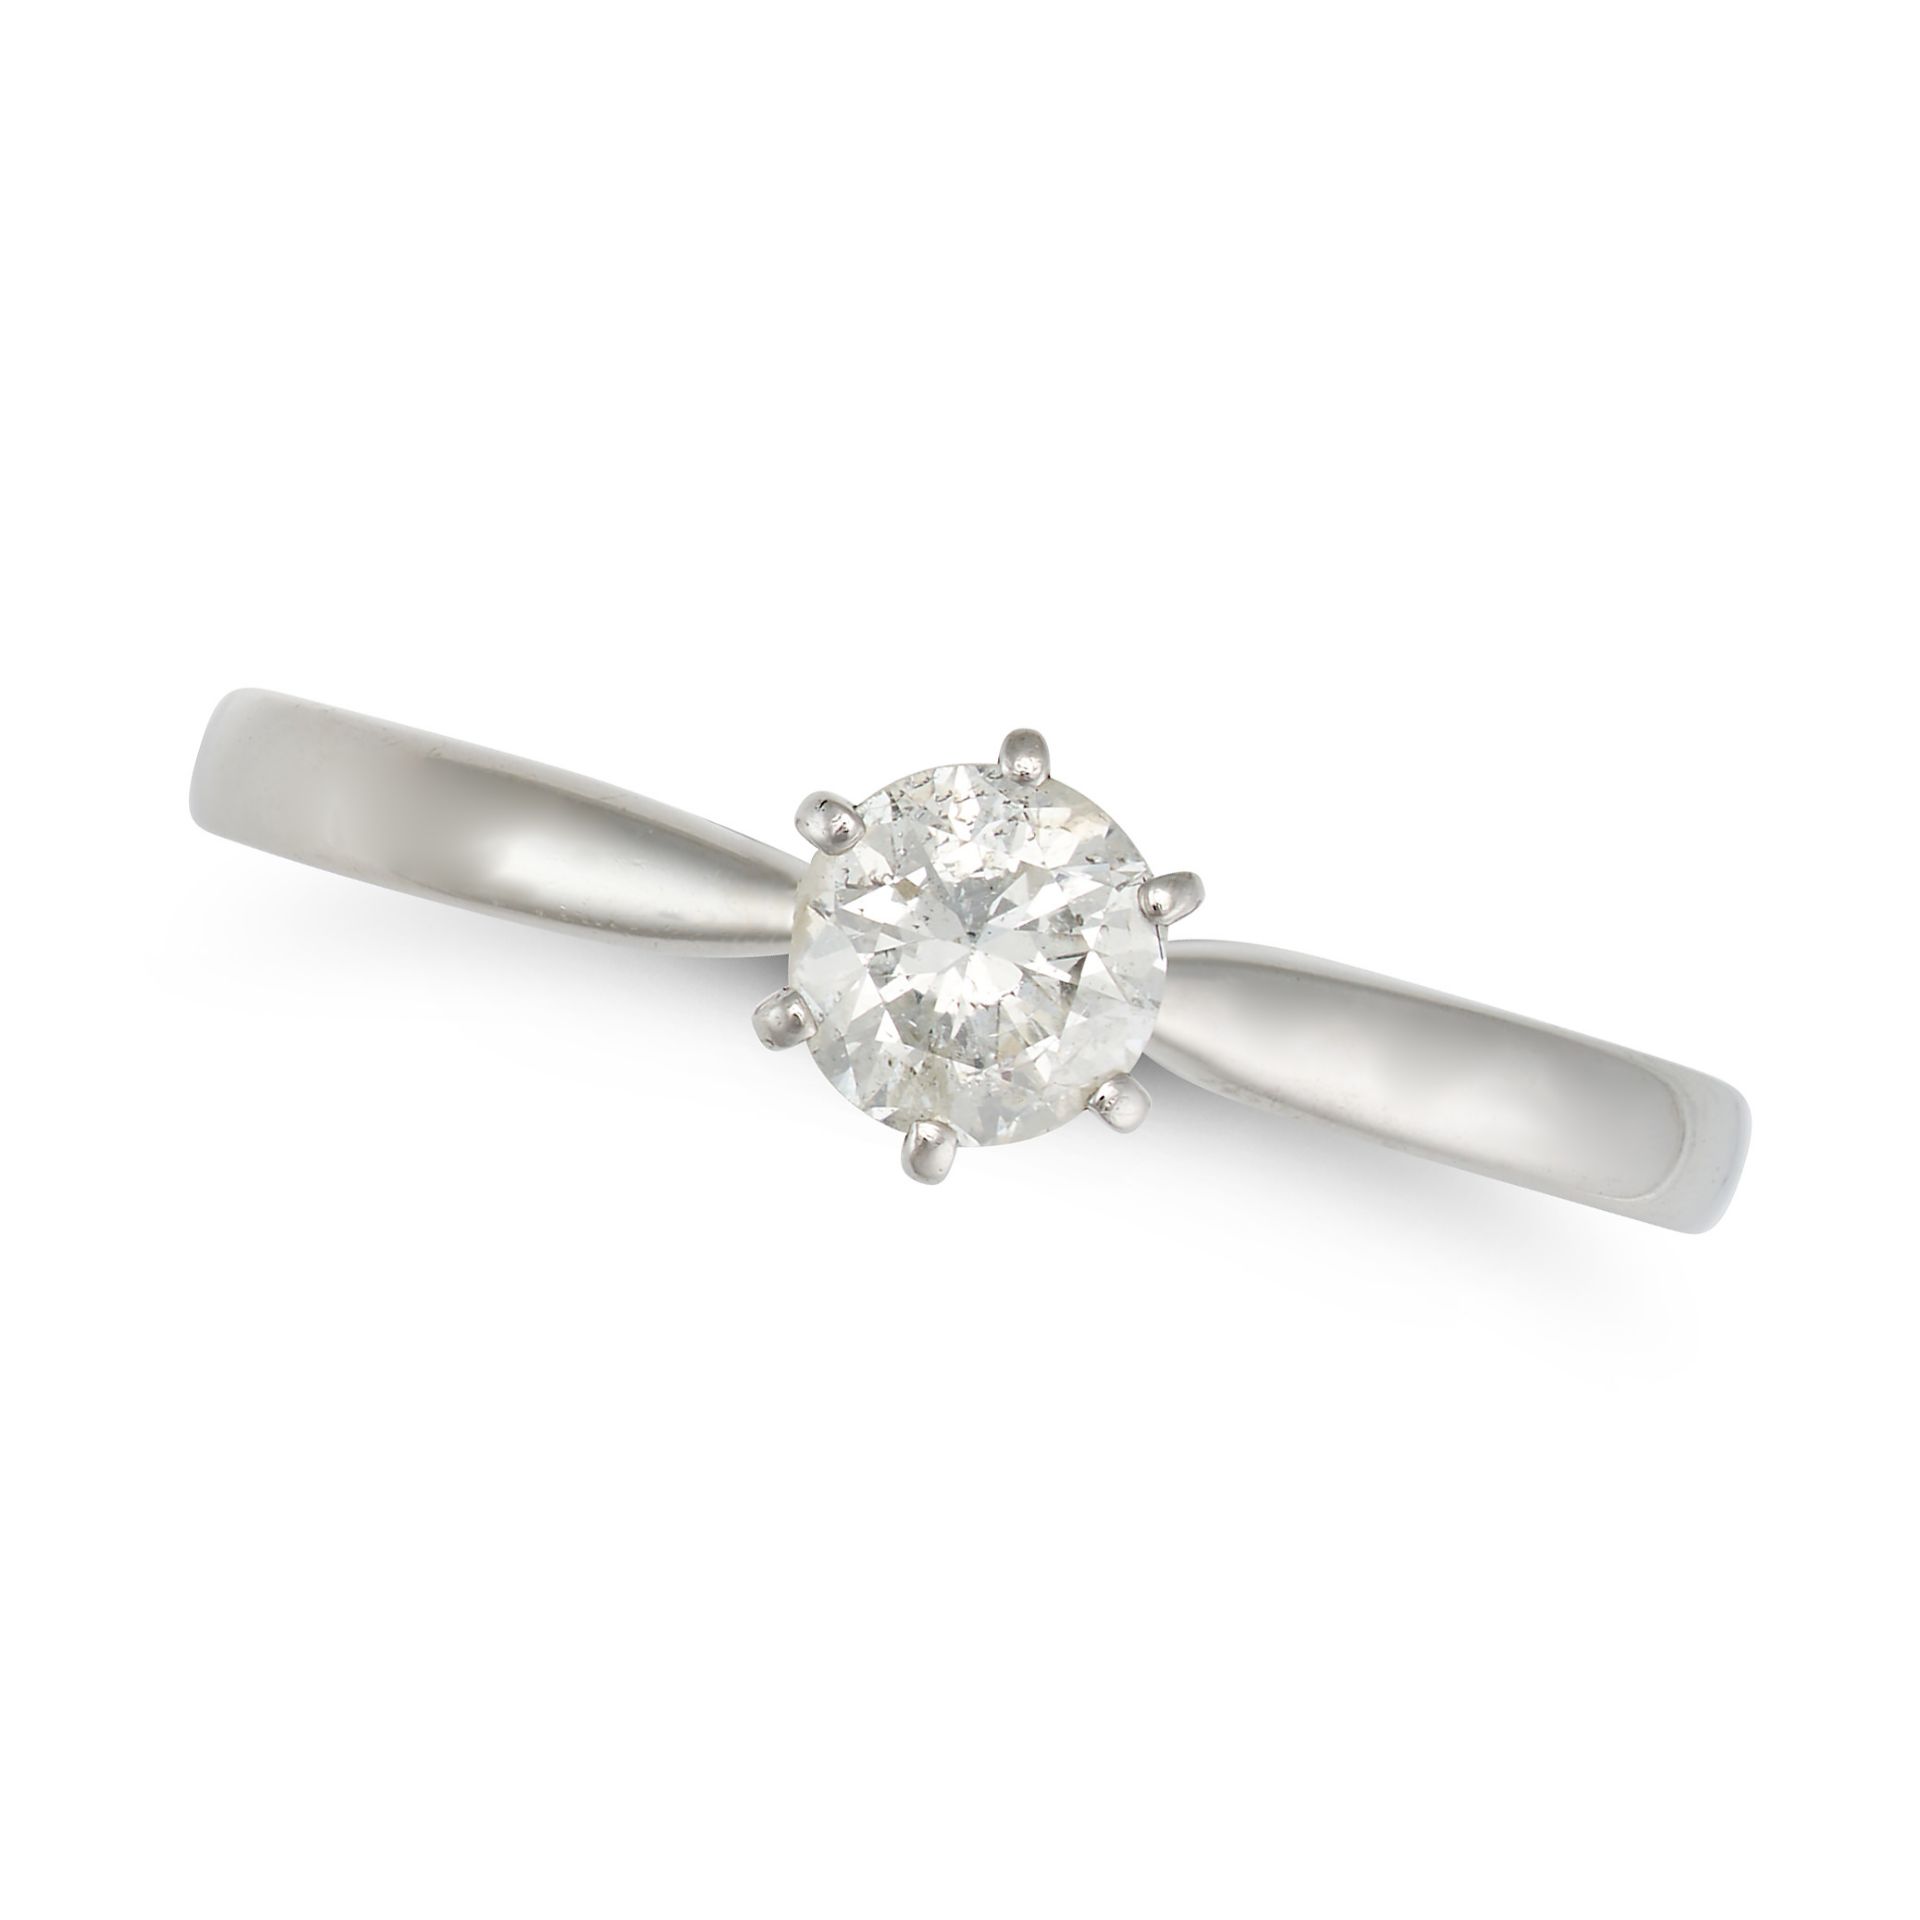 A SOLITAIRE DIAMOND RING in platinum, set with a round brilliant cut diamond of approximately 0.5...